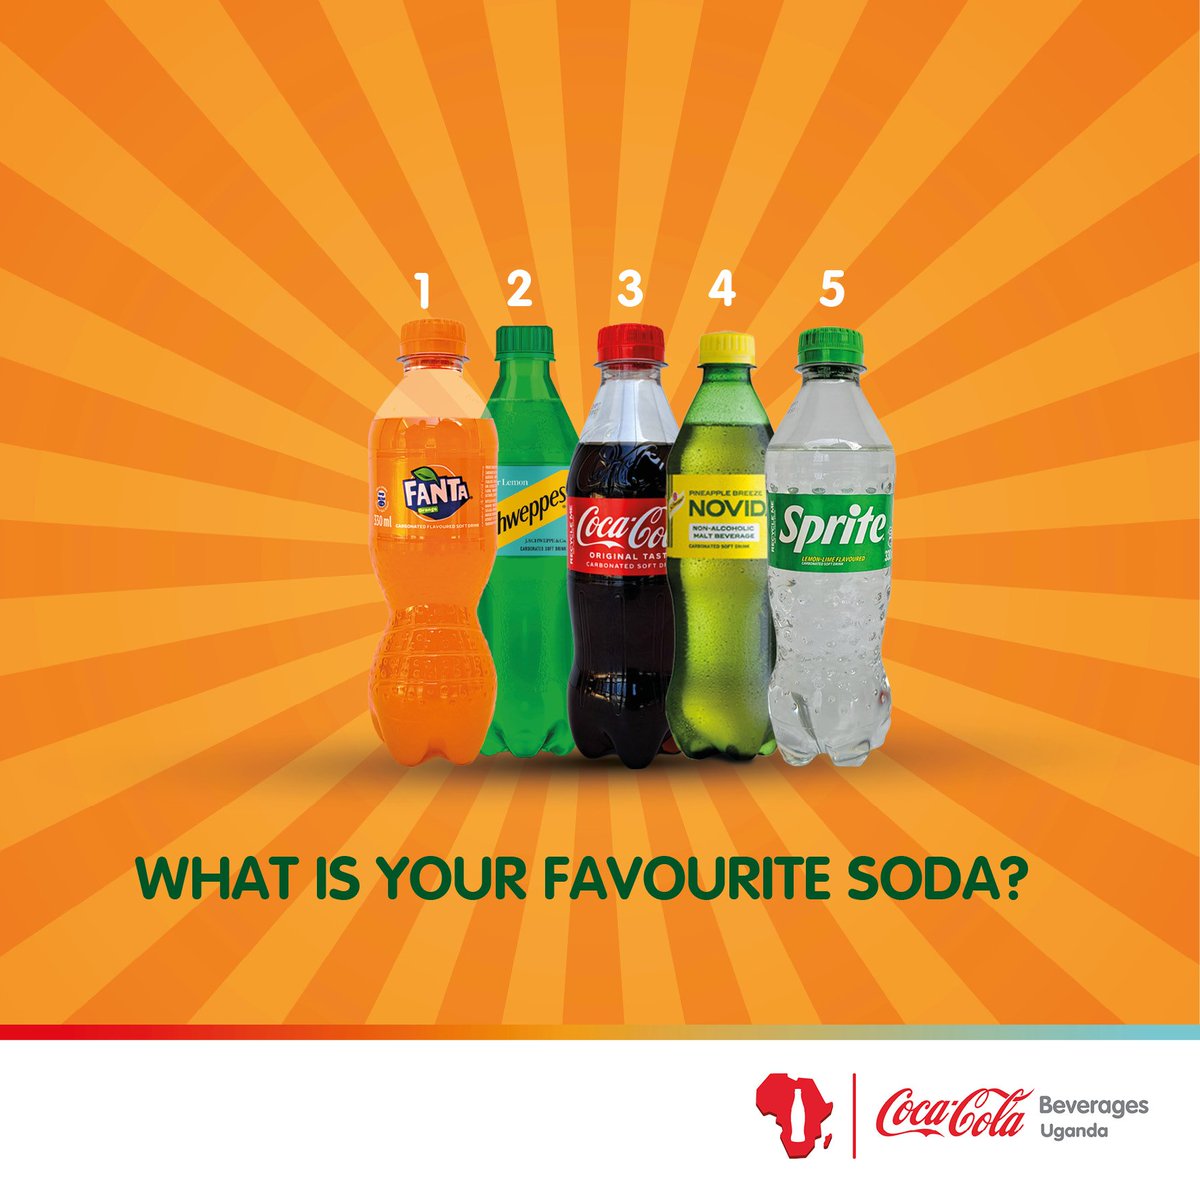 A #FunFriday means closing the week with your favorite soda.  Which soda do you like the most and why?

#RefreshUG 
#CCBU